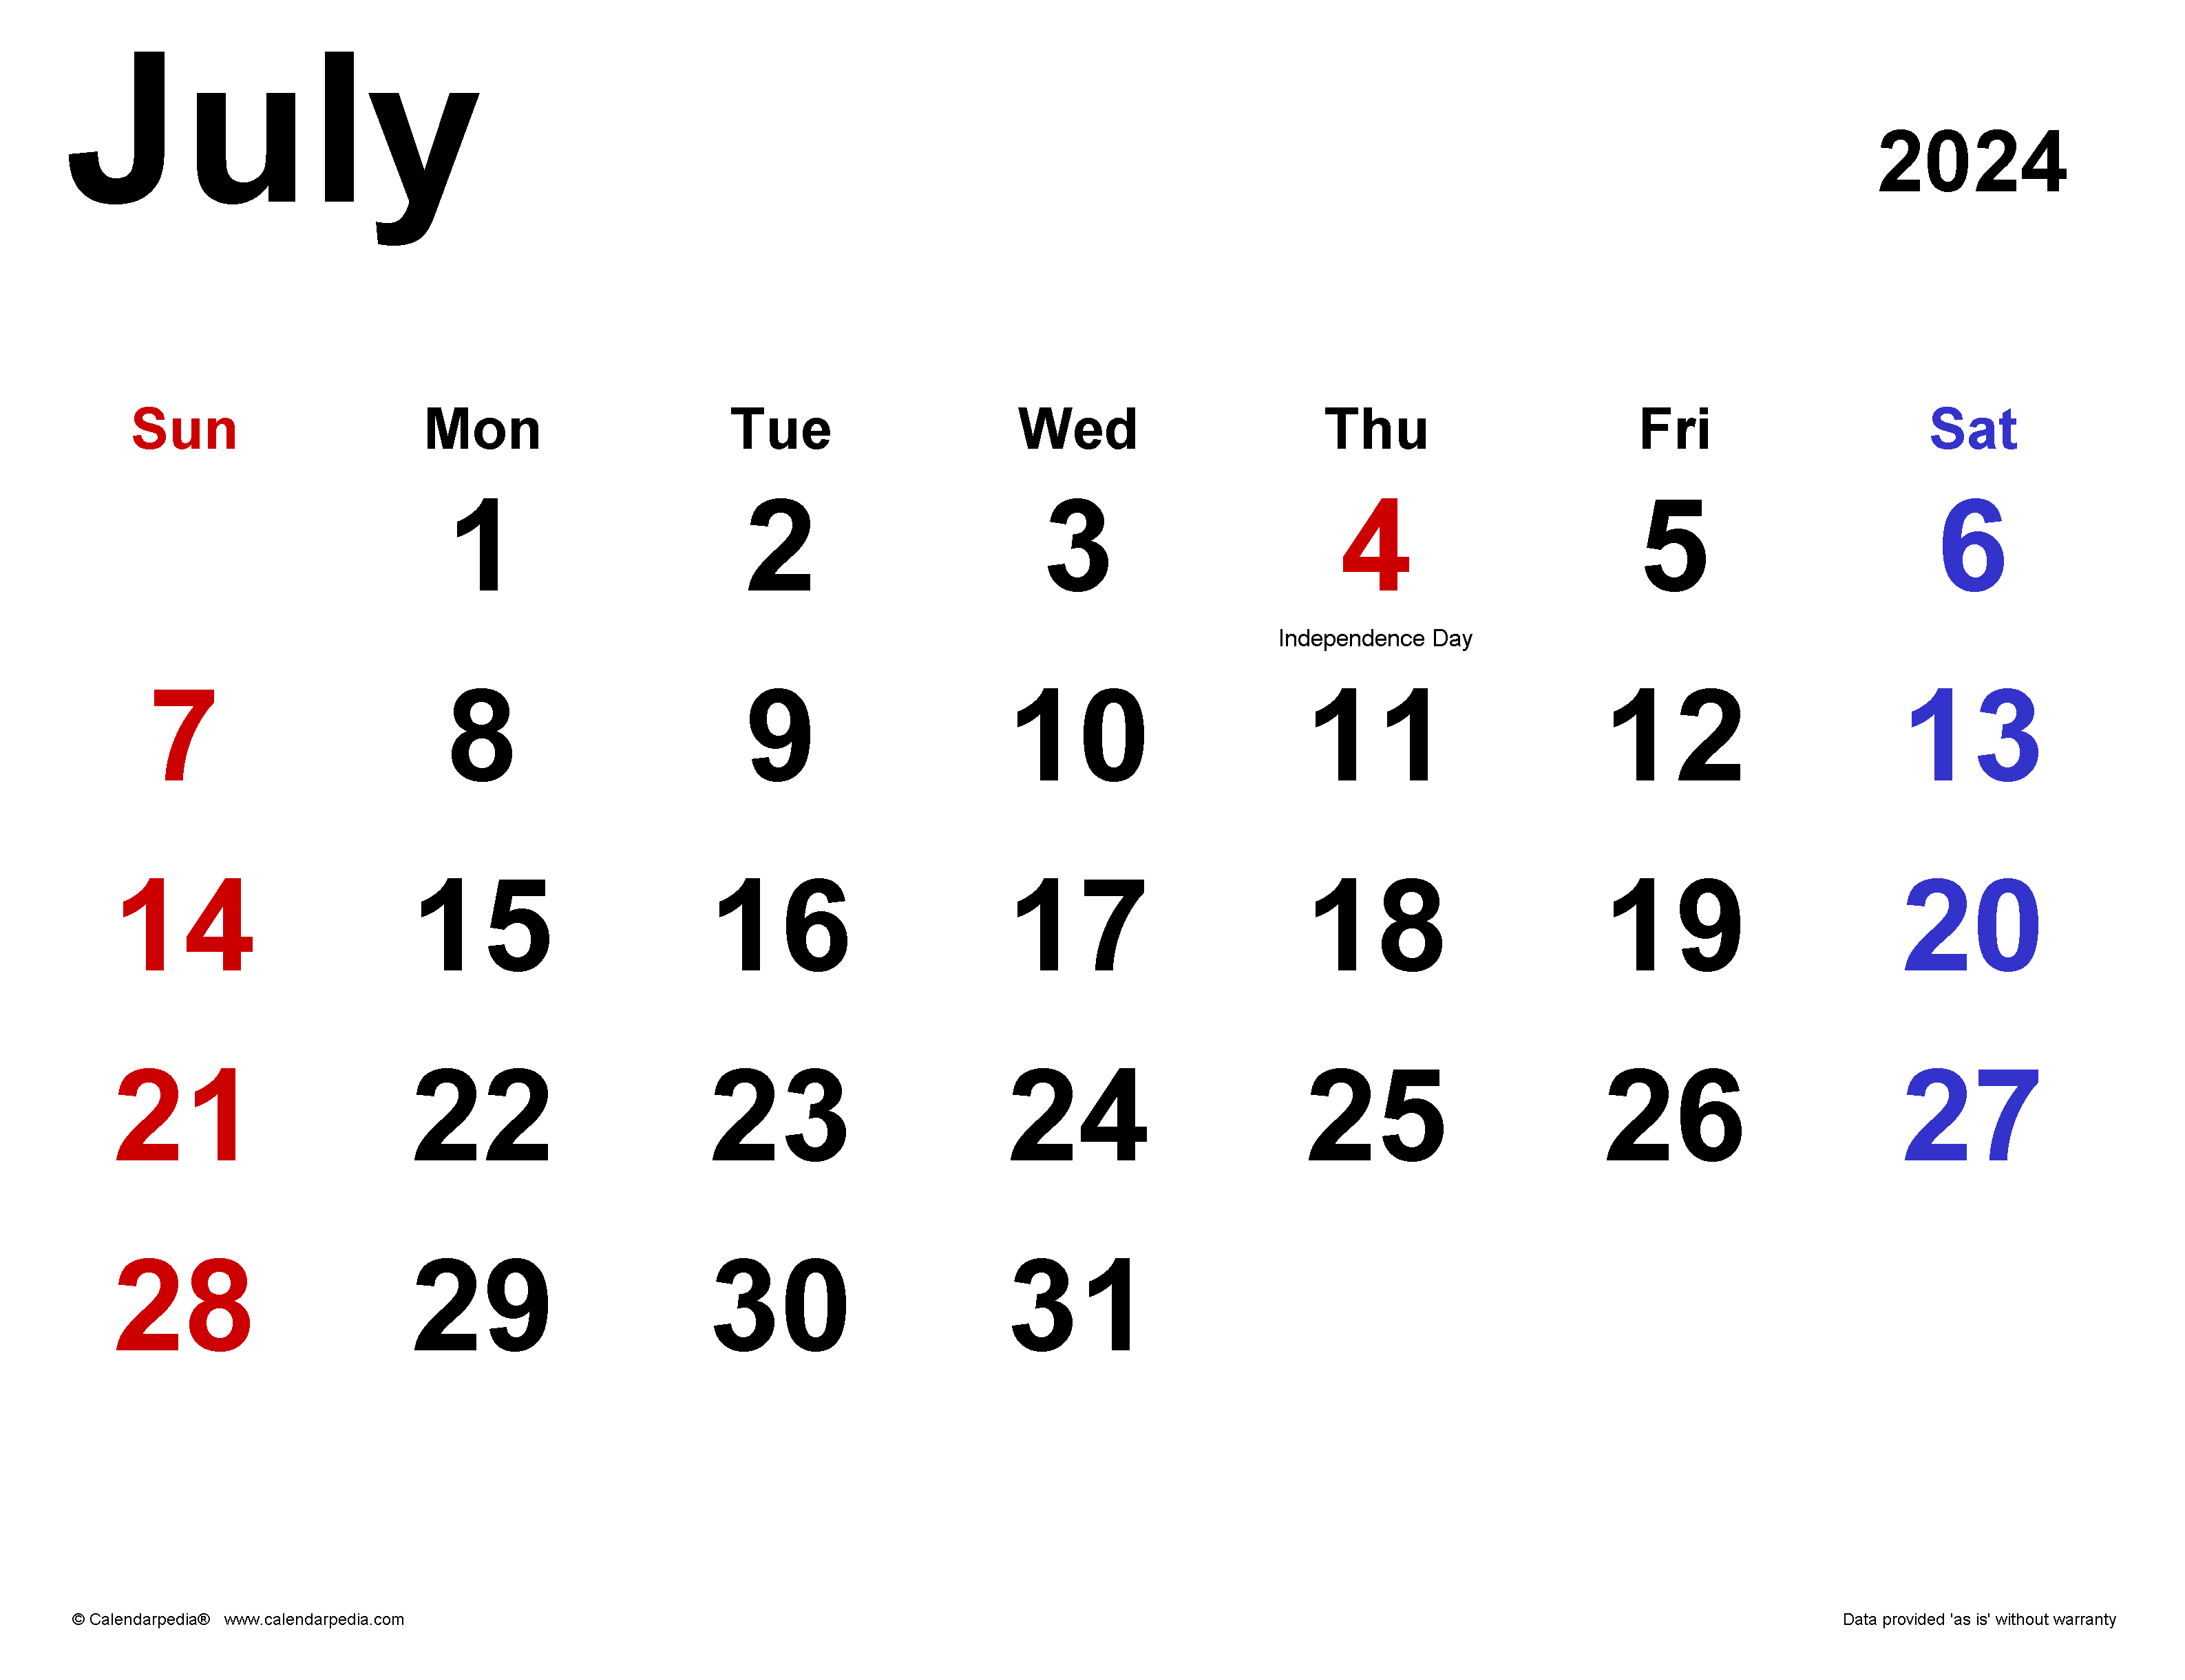 July 2024 Calendar | Templates For Word, Excel And Pdf in Calendar Days July 2024